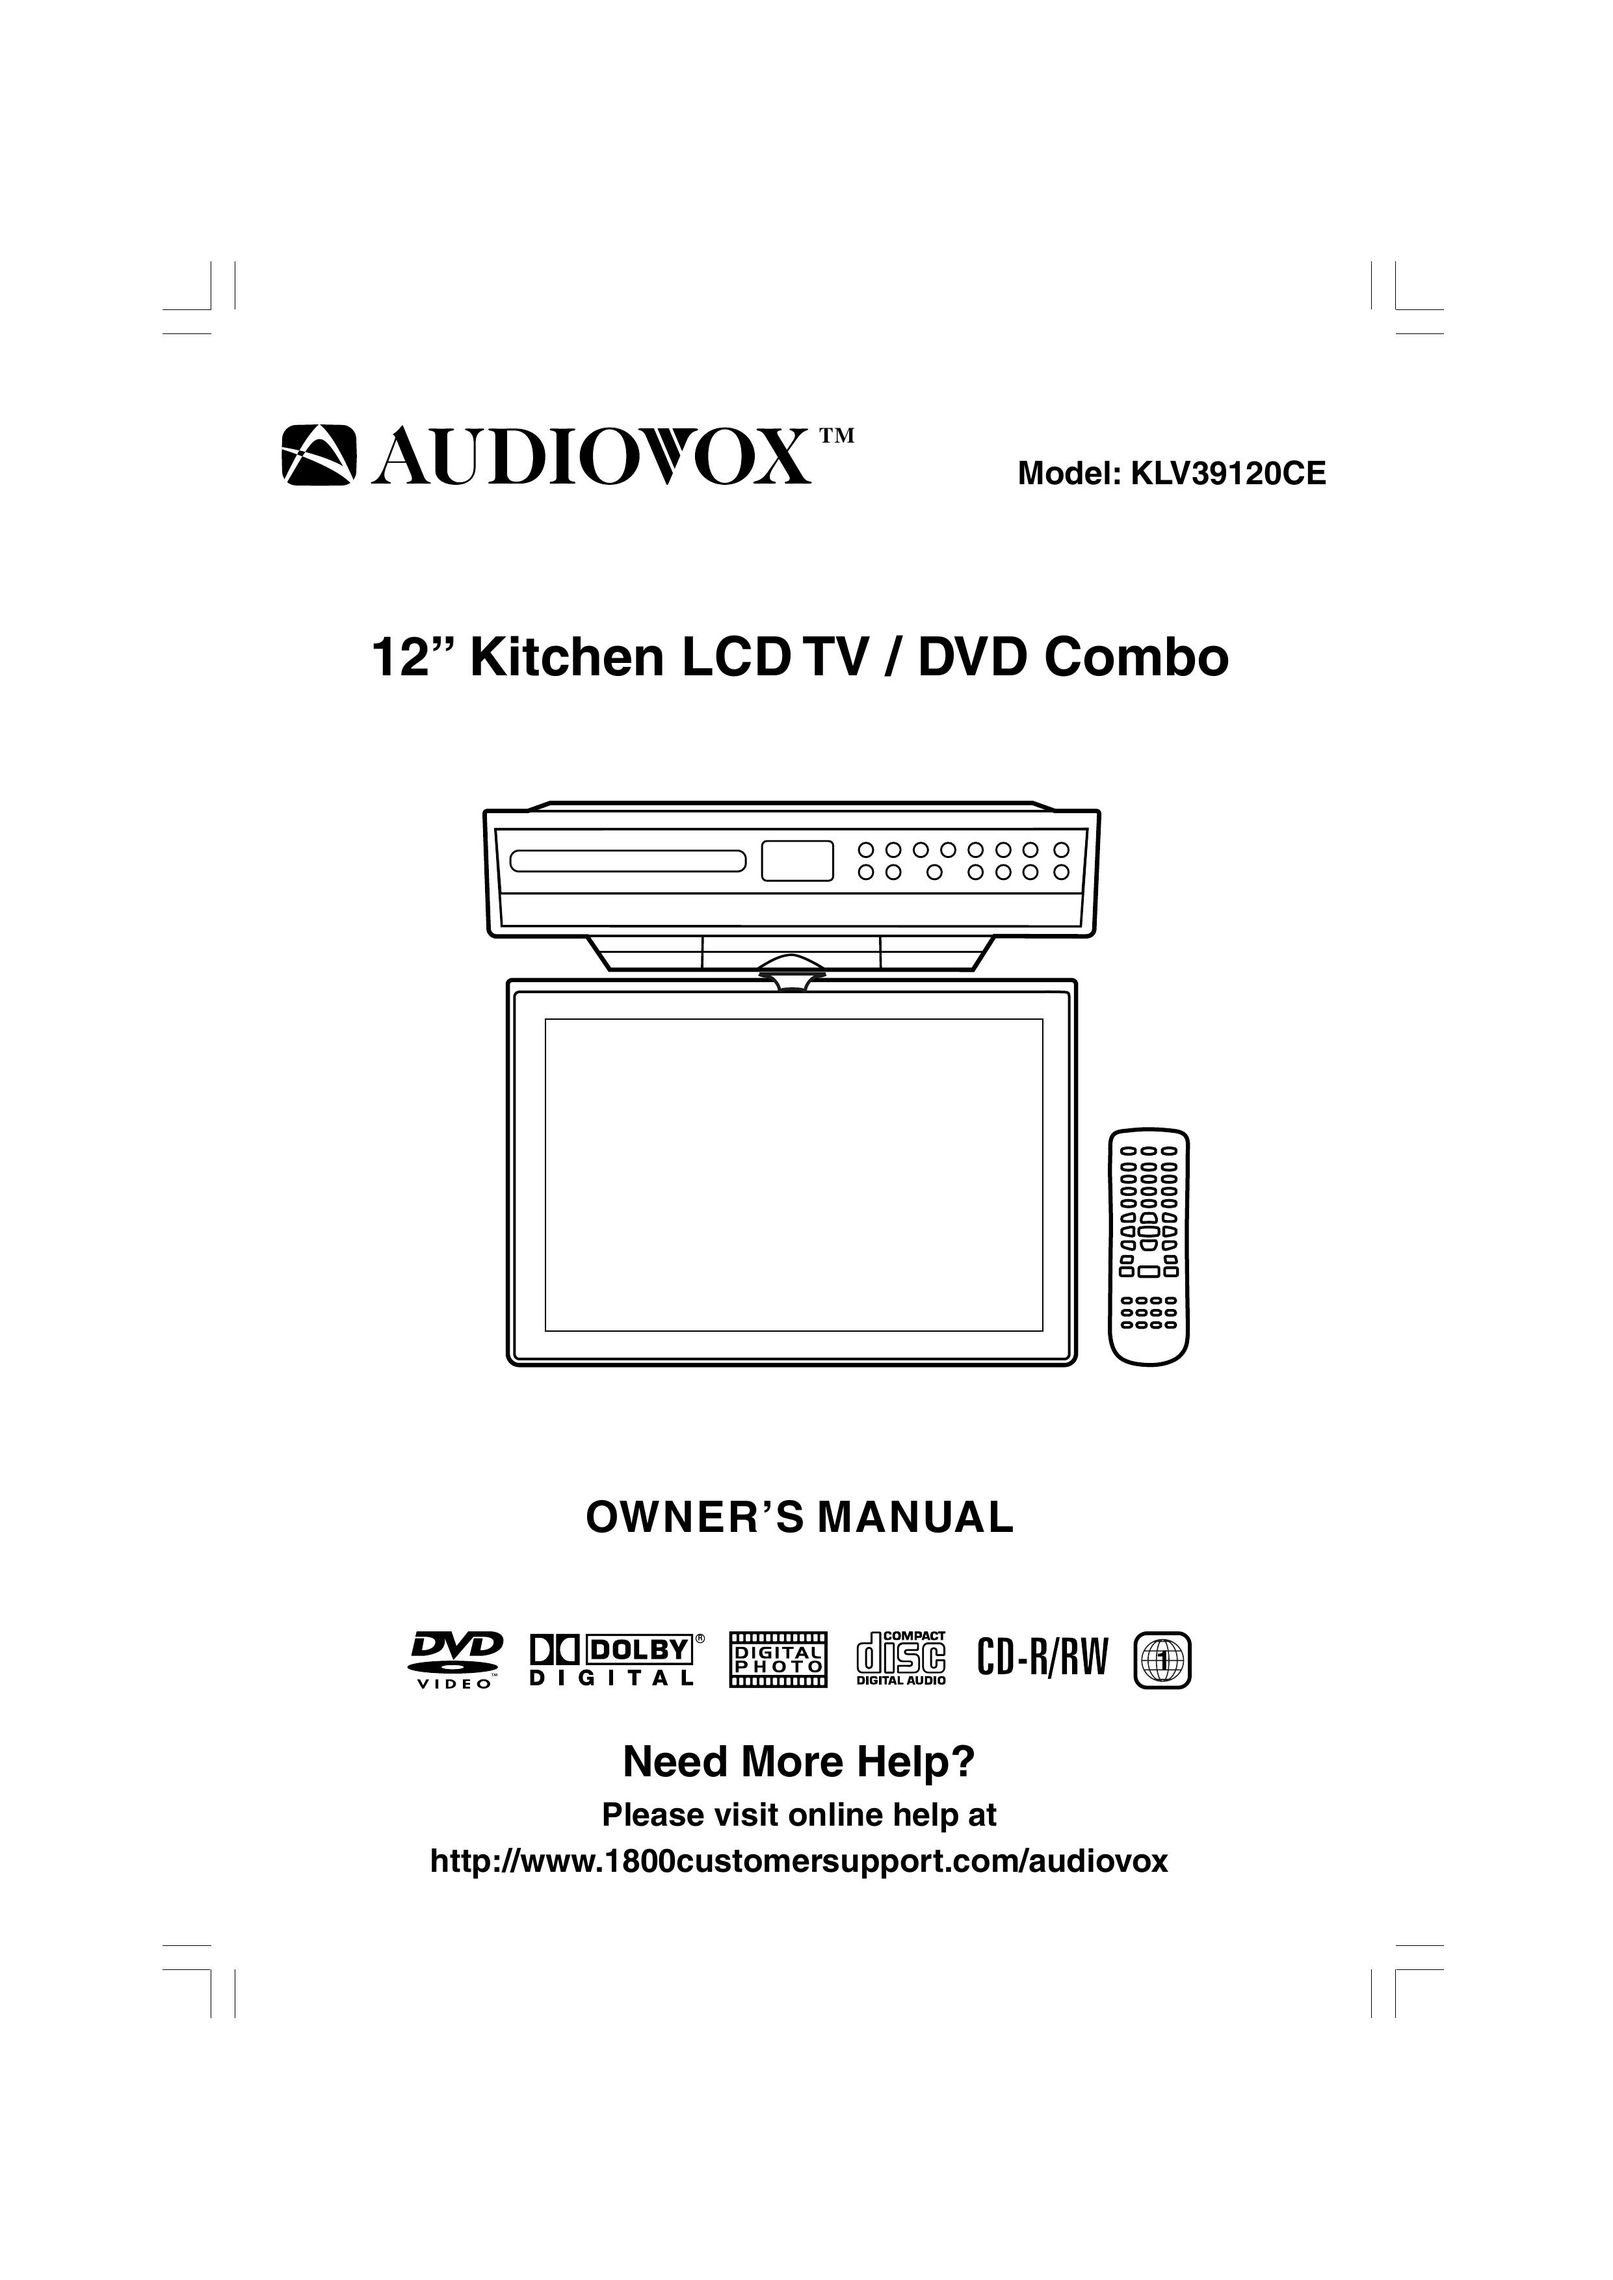 Audiovox KLV39120CE Flat Panel Television User Manual